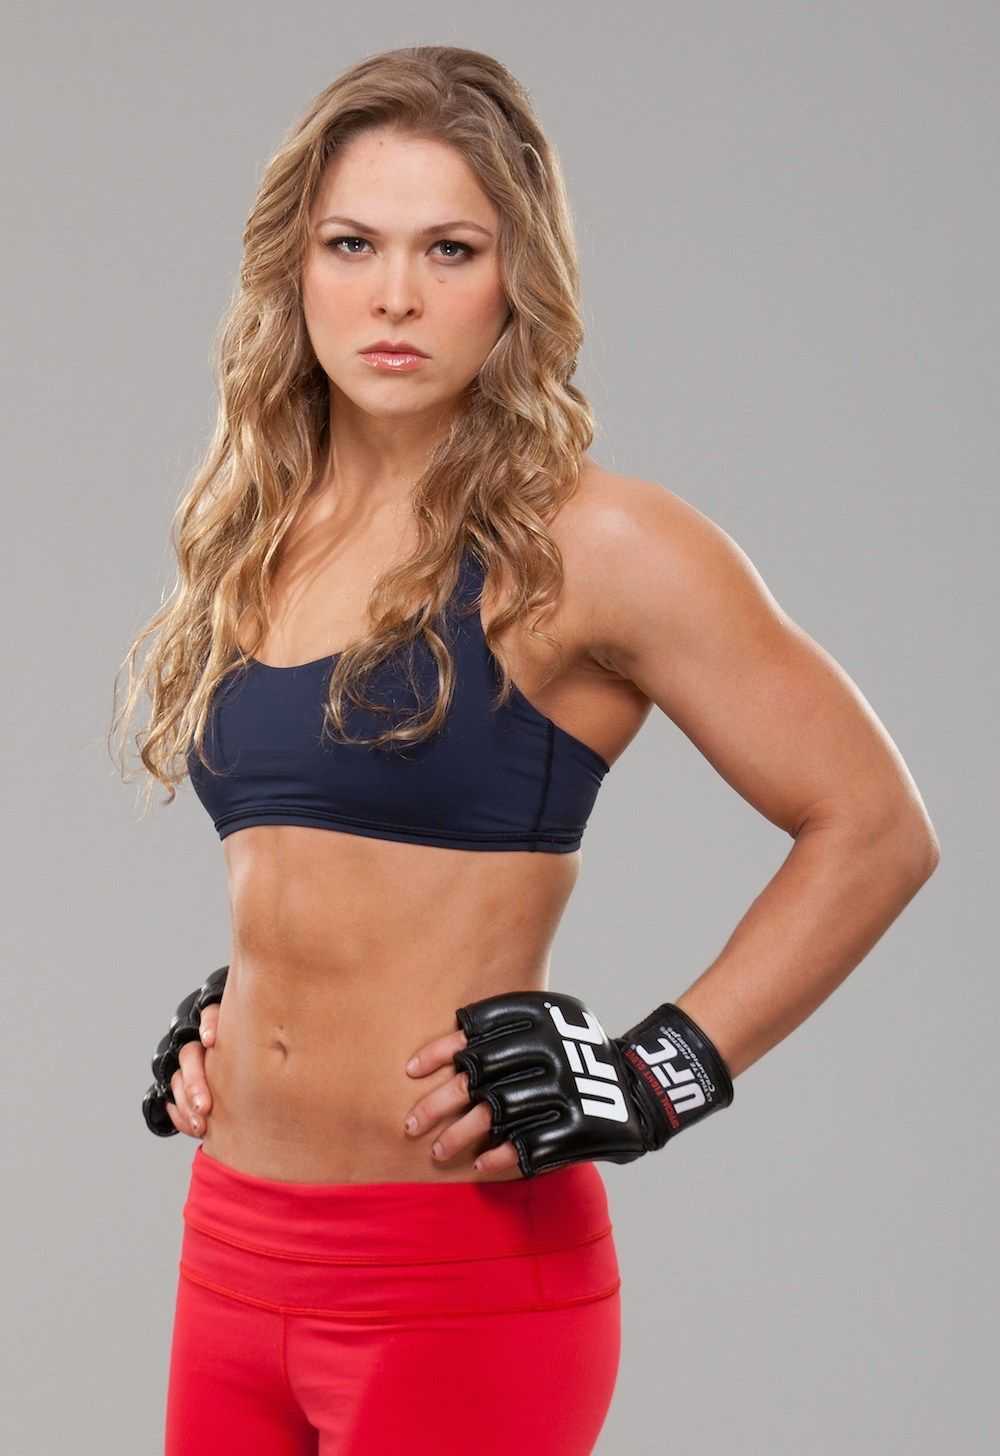 51 Sexy Ronda Rousey Boobs Pictures Will Leave You Panting For Her 45